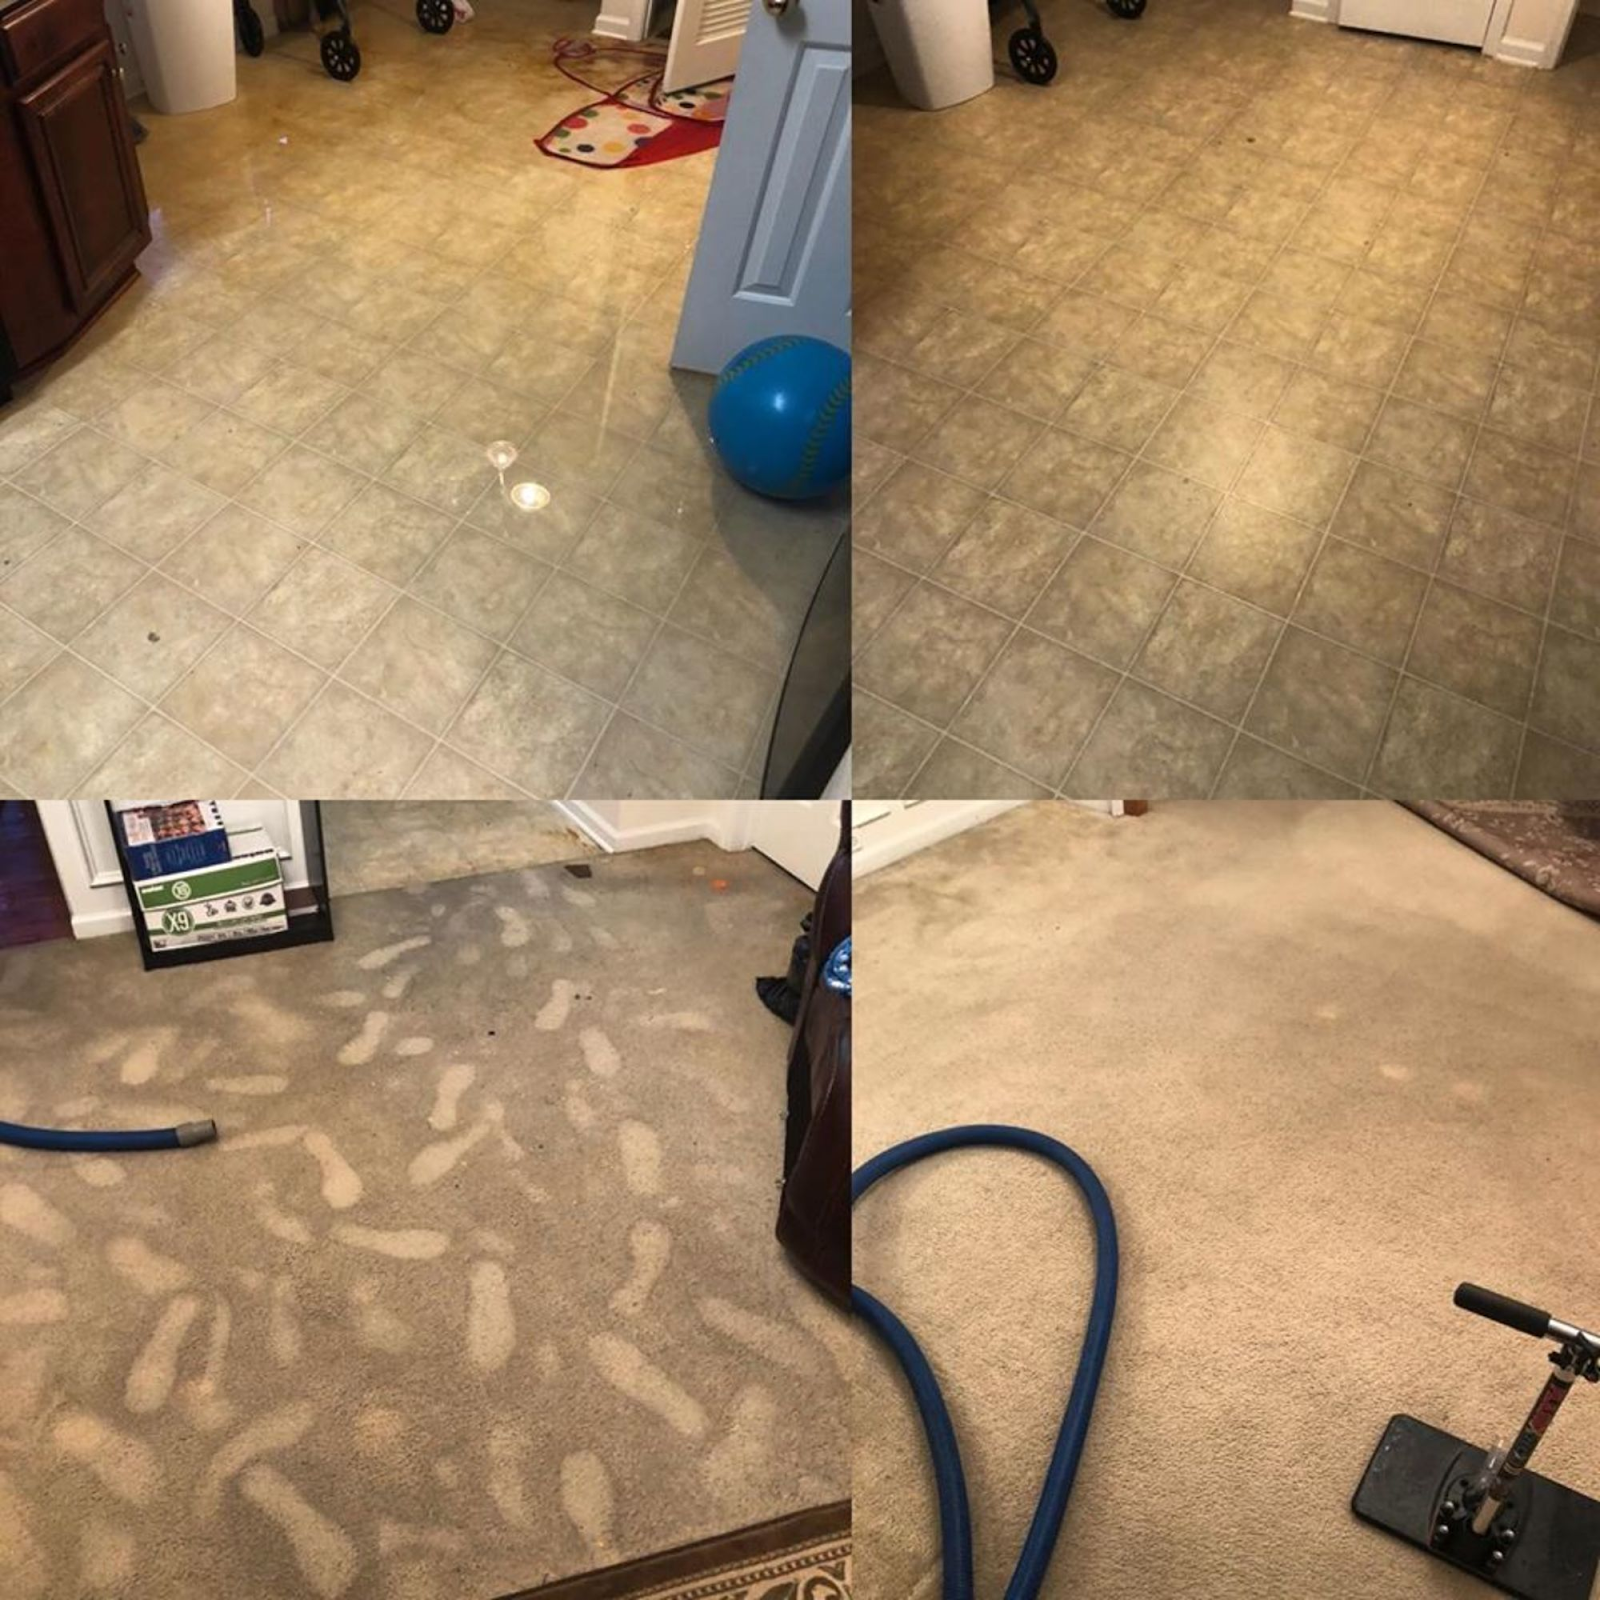 A vacuum cleaner is being used to clean a carpet